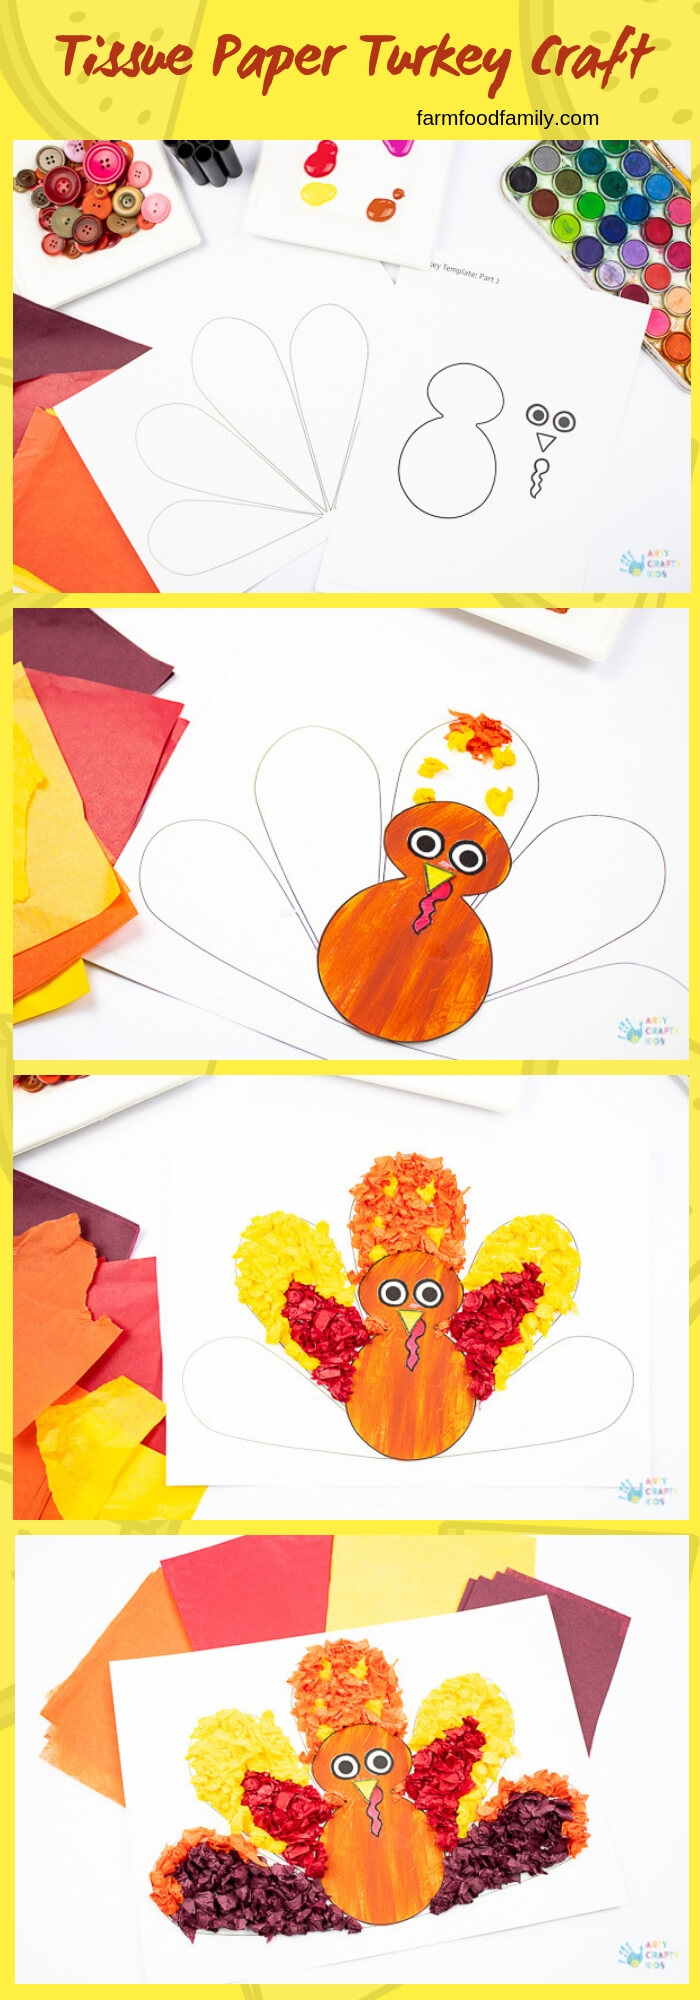 Tissue Paper Turkey Craft | Simple Ideas for Kids' Crafts for Thanksgiving - FarmFoodFamily.com